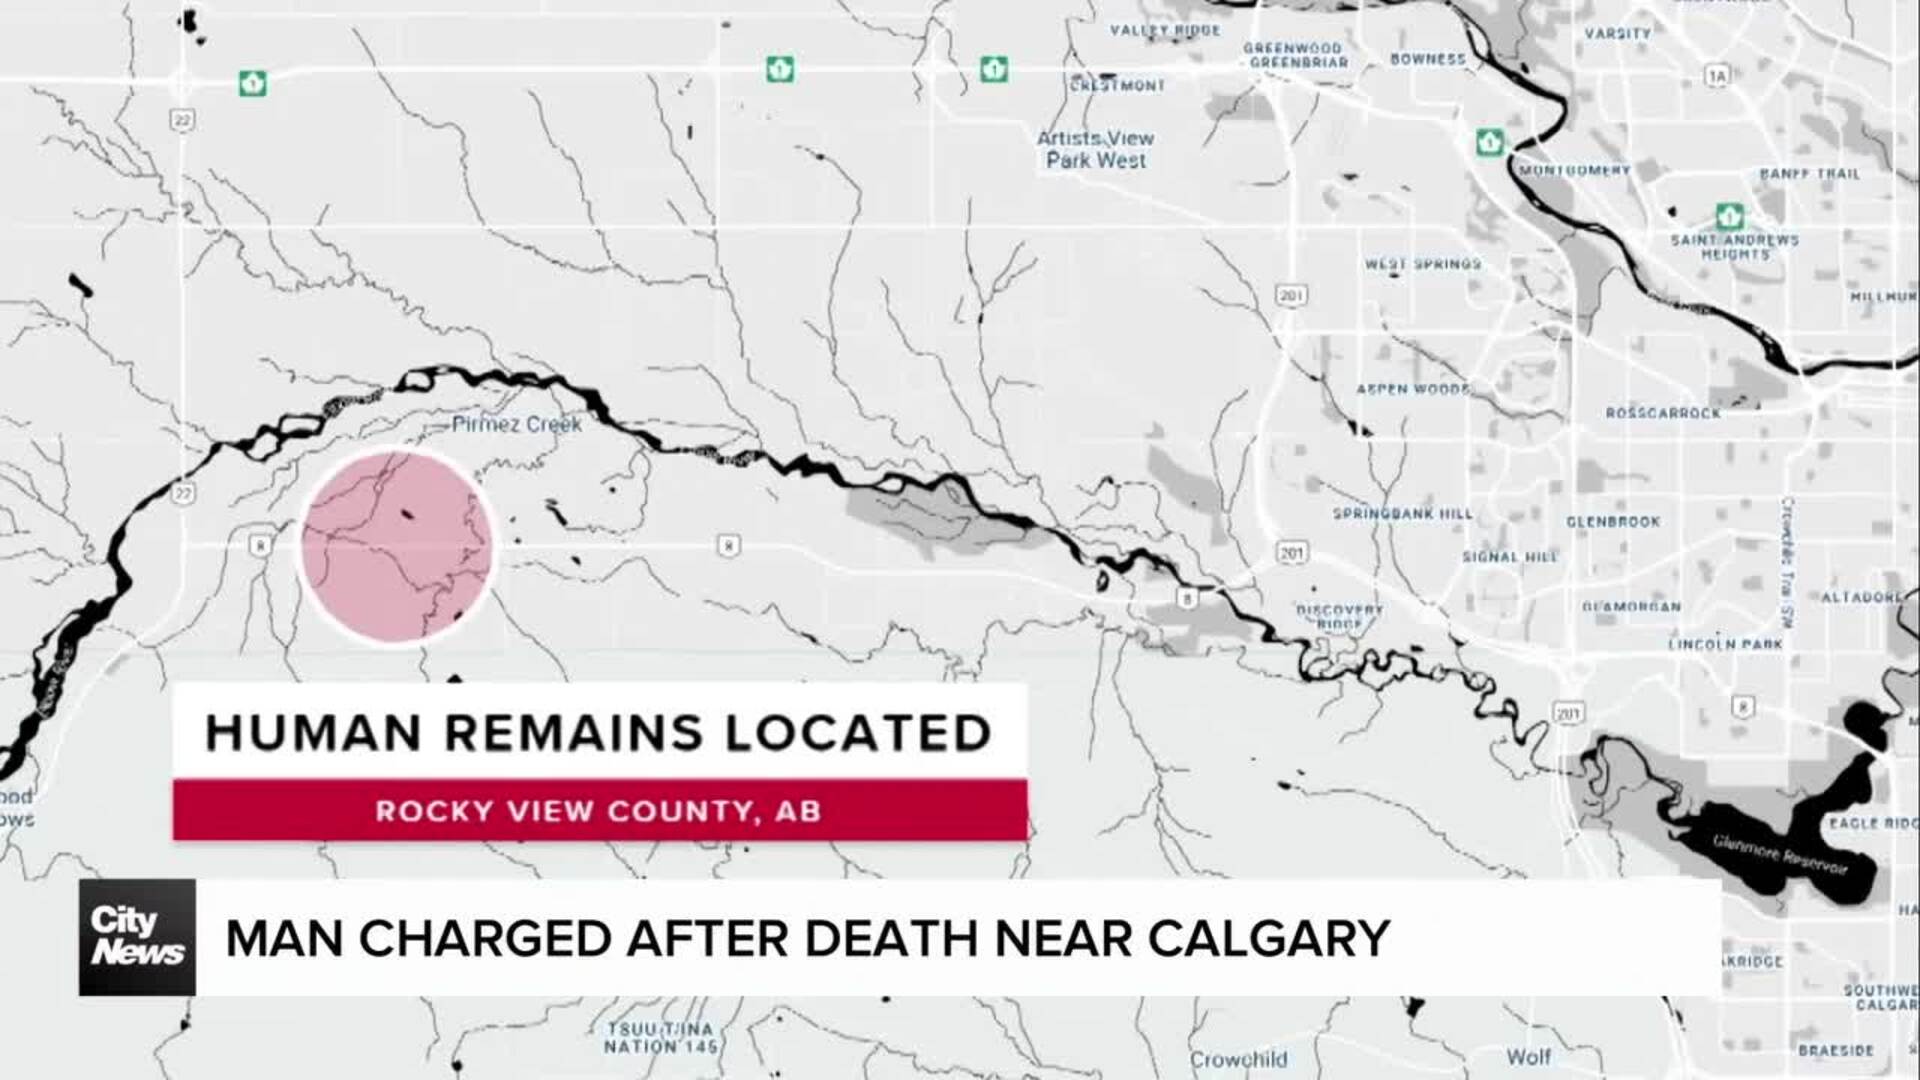 Man charged after death near Calgary